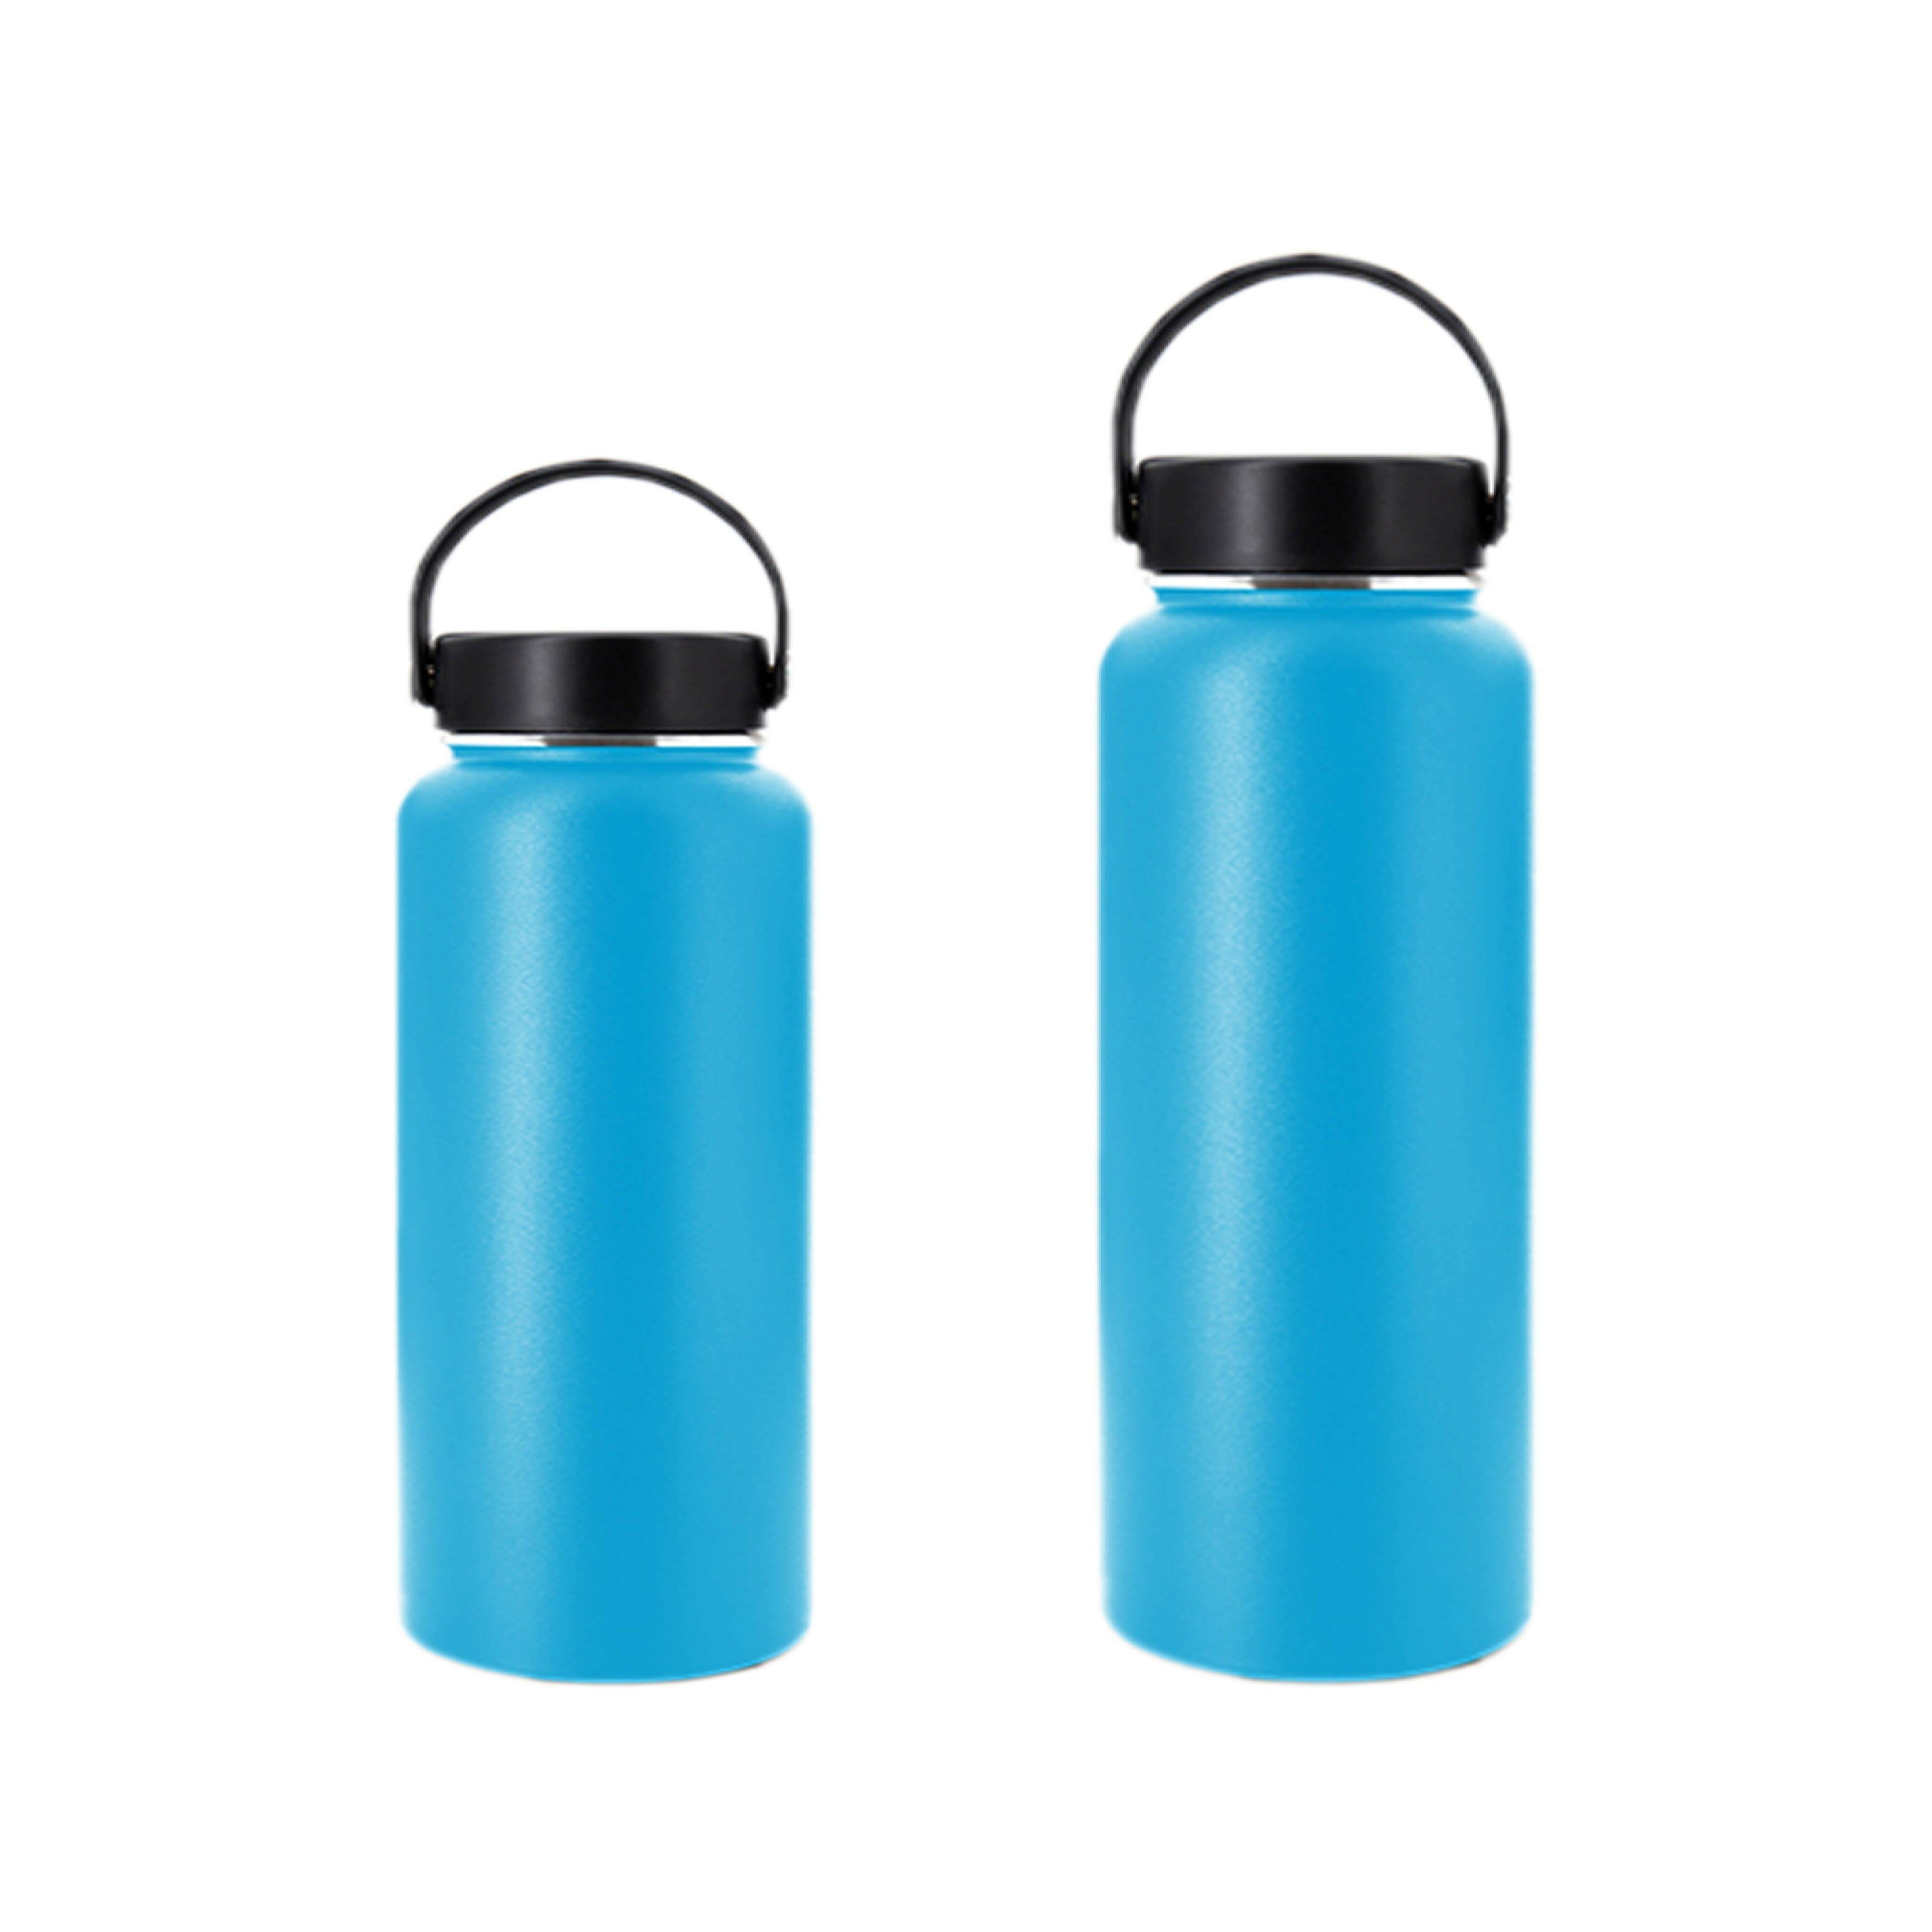 Hydro Mate Insulated Stainless Steel Water Bottle Blue | Stainless Steel Water Bottles | Brilliant Home Living